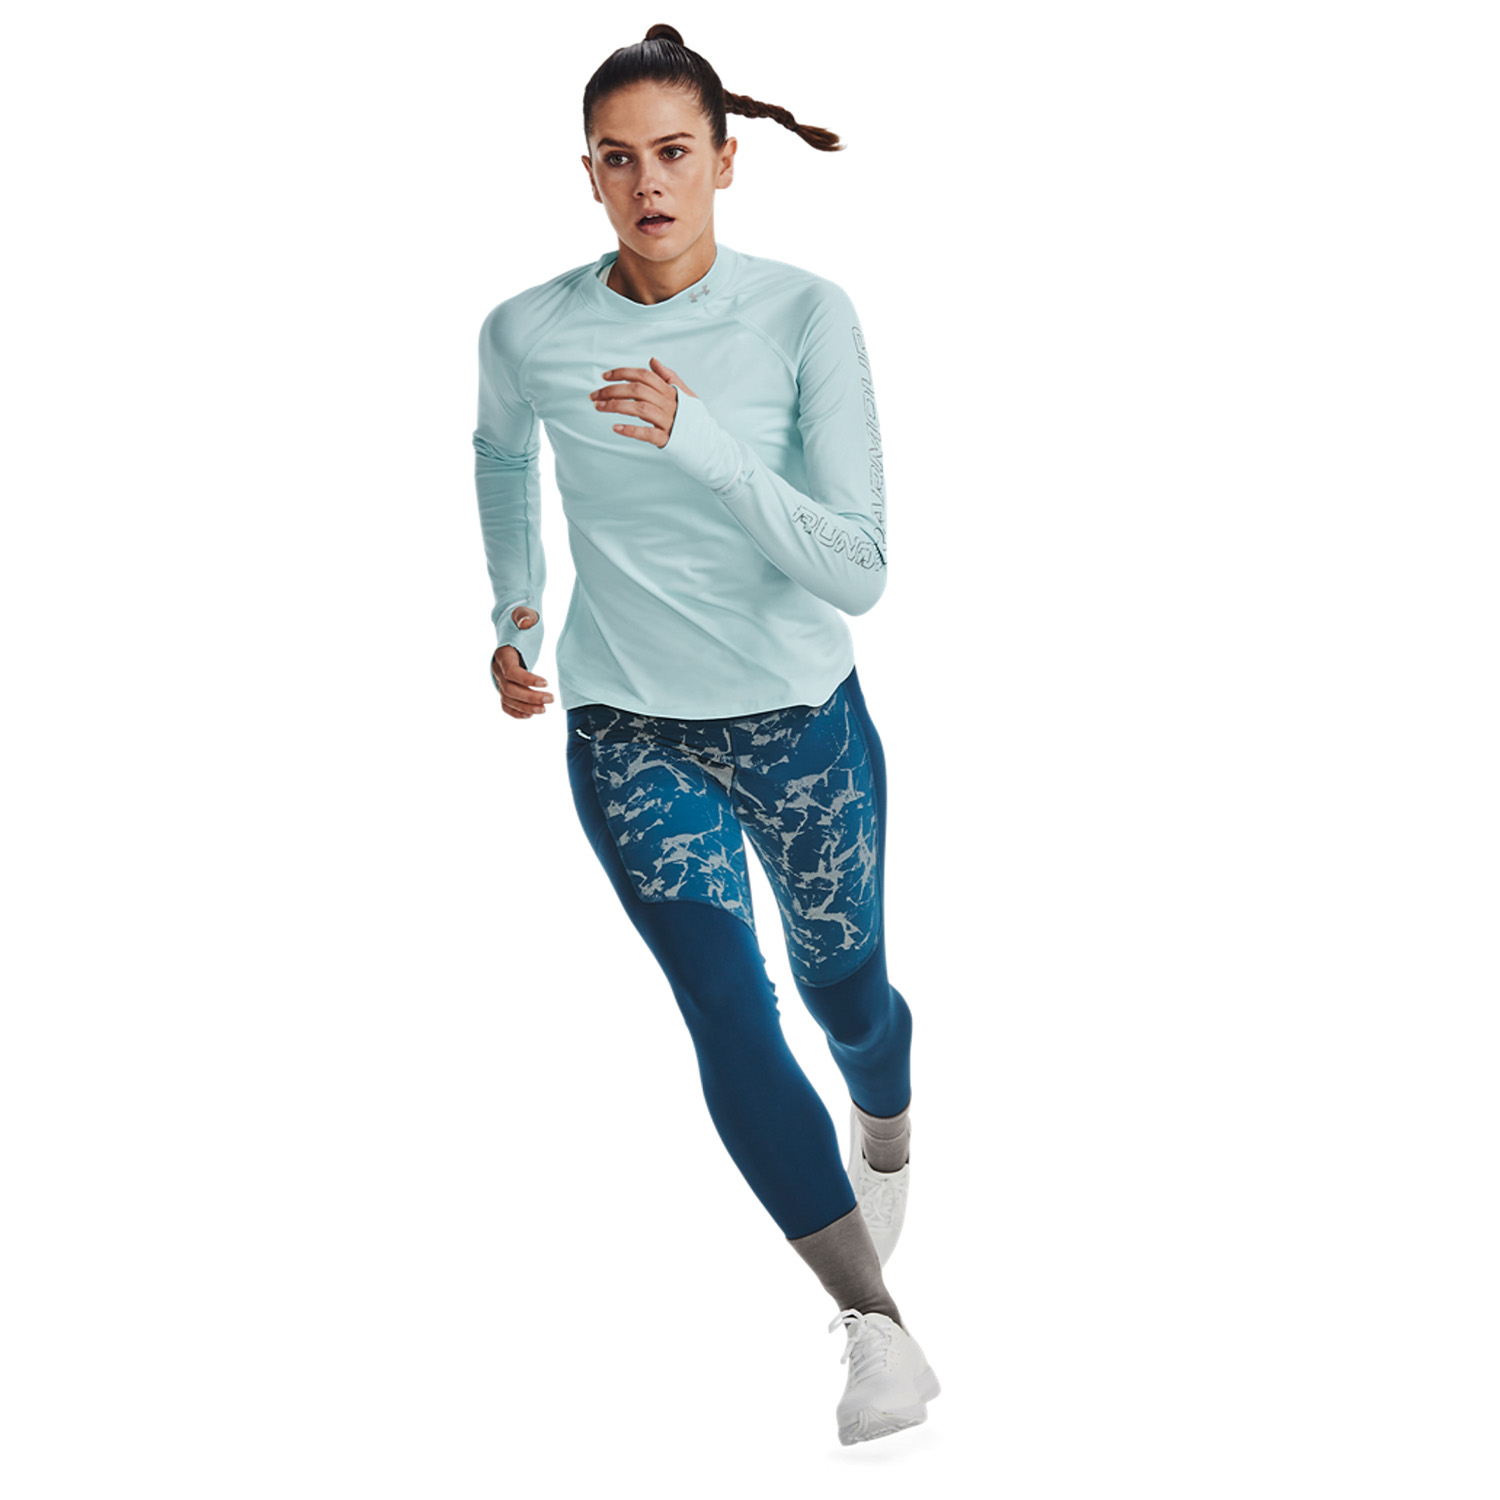 Under Armour Outrun The Cold Shirt - Fuse Teal/Reflective